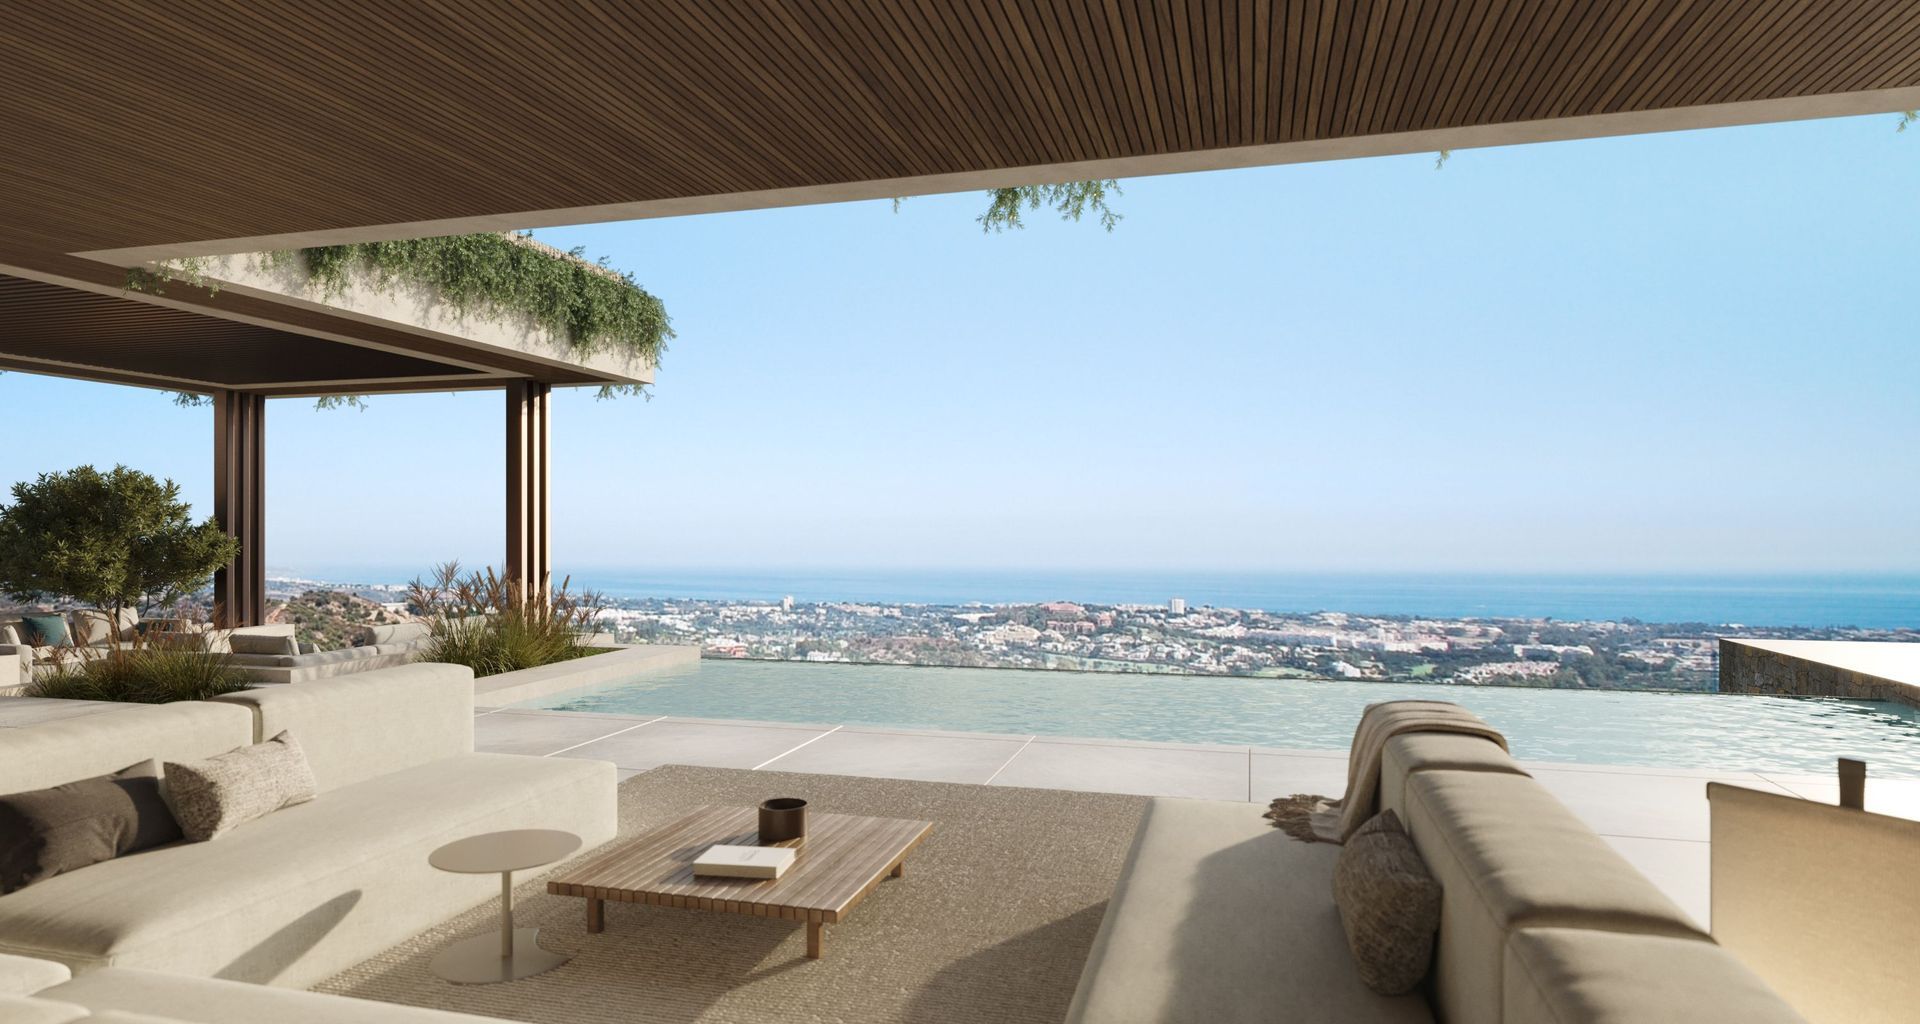 One of the most exciting property launches in Marbella, Benahavis foto-1